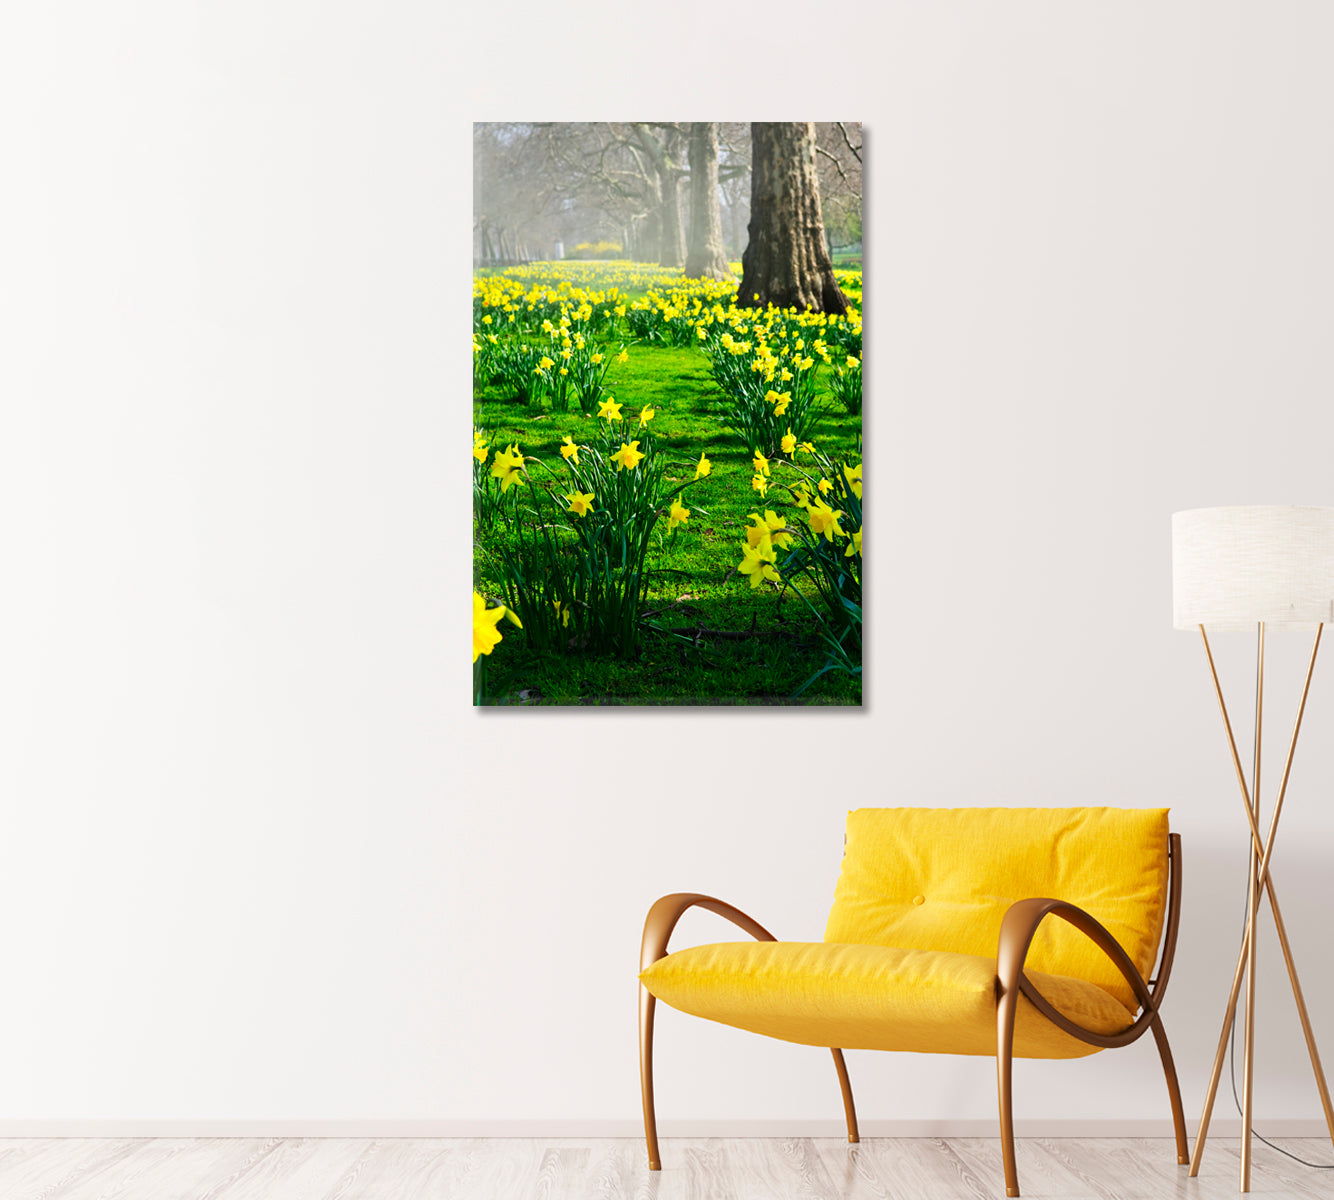 Blooming Daffodils Flowers Canvas Wall Art-Canvas Print-CetArt-1 panel-16x24 inches-CetArt